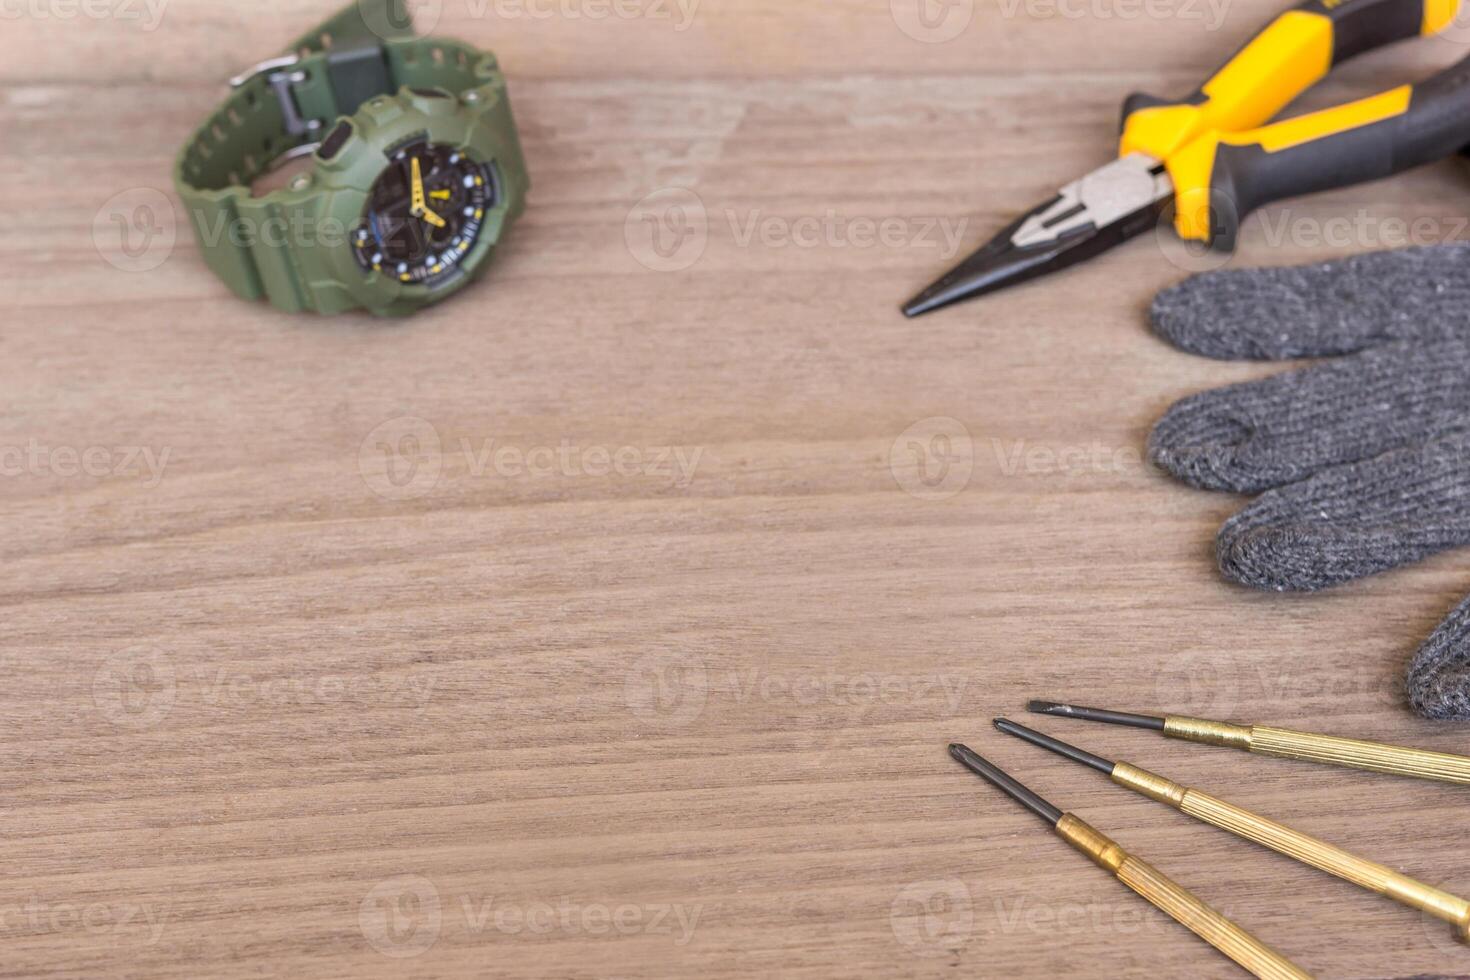 Repair concept of digital watch and screwdriver Steel pliers Gloves on the wood floor for texture and background photo